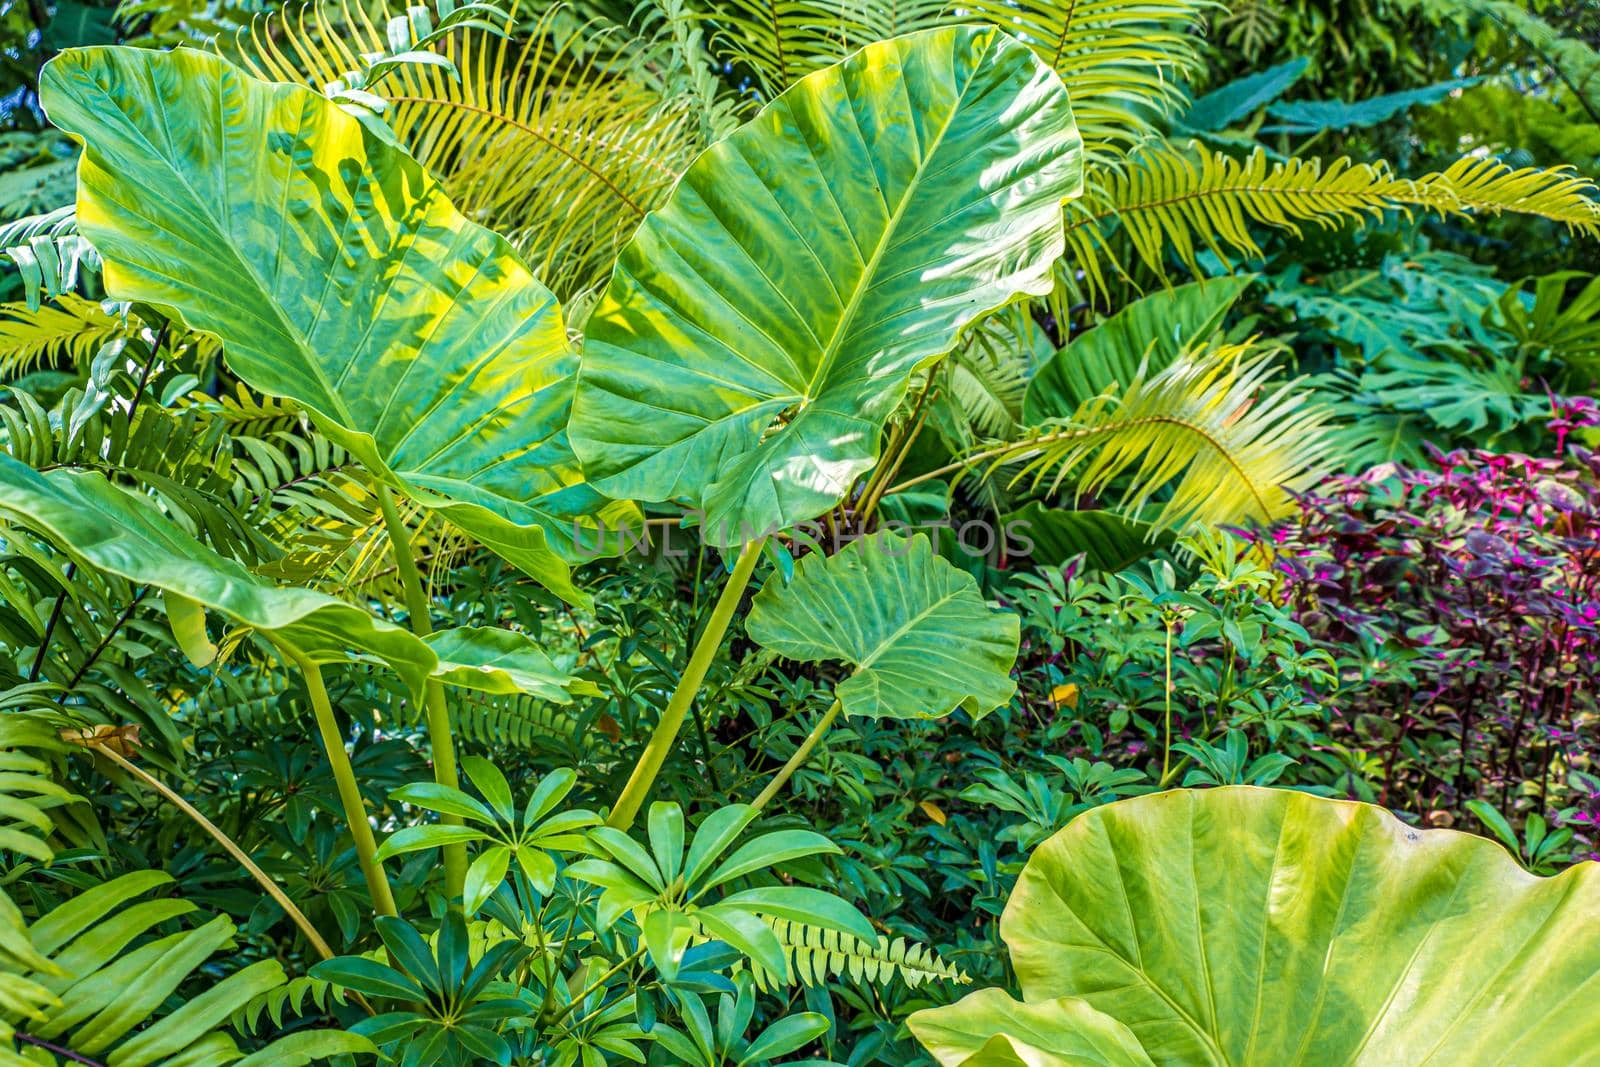 Green nature of Fern and trees in tropical garden nature background by Petrichor